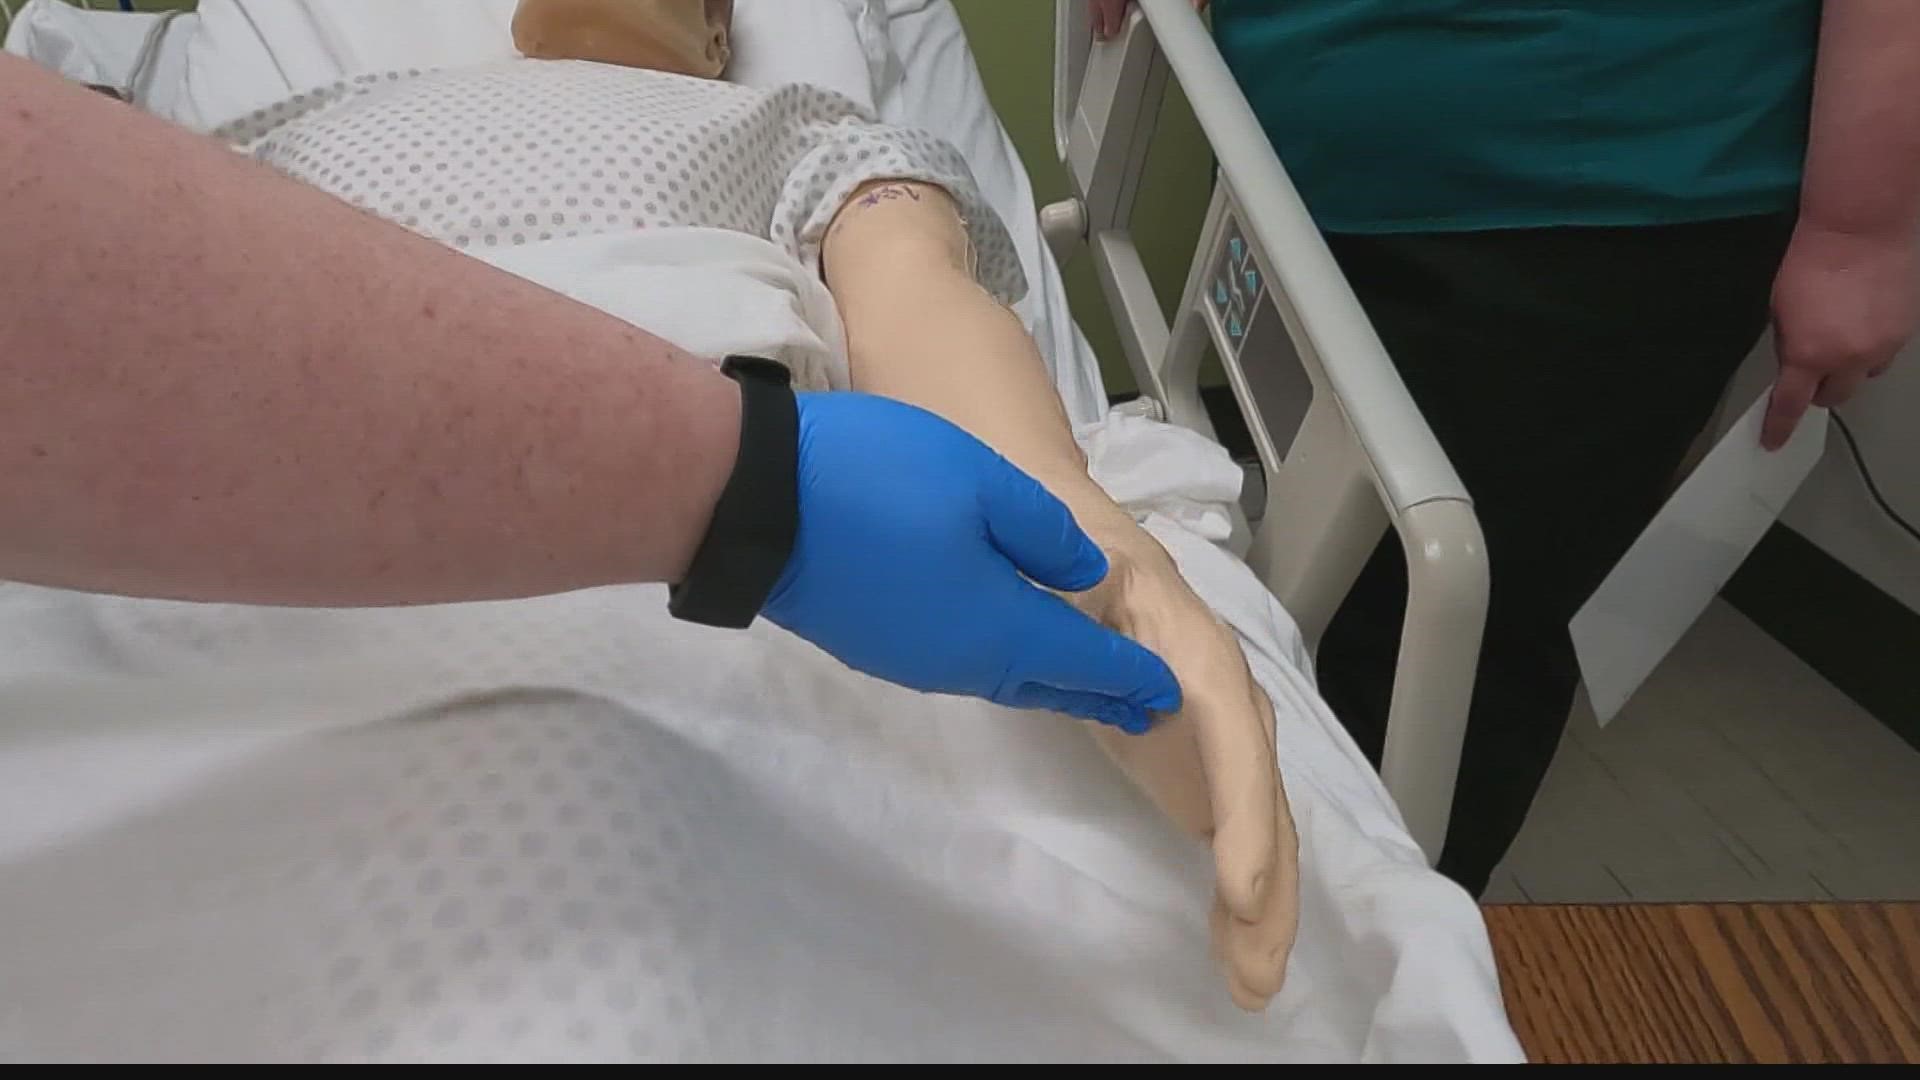 A new law just signed by the governor will allow more simulations in nursing schools.